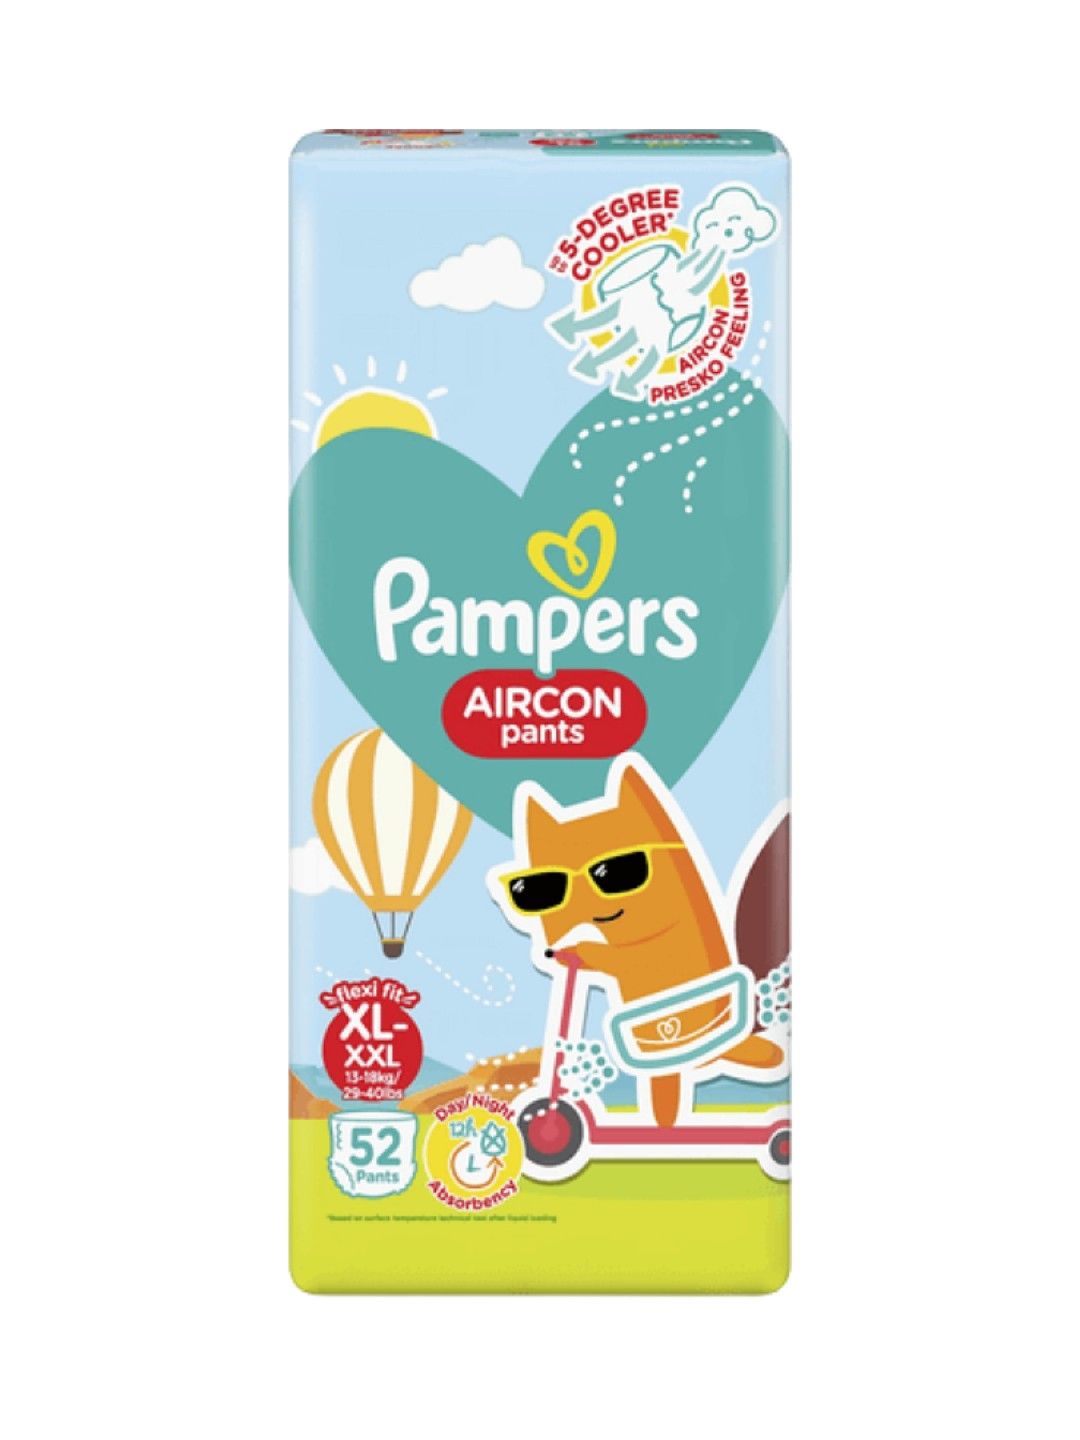 Pampers Aircon Pants Diapers XL 52s x 1 pack (52 pcs)